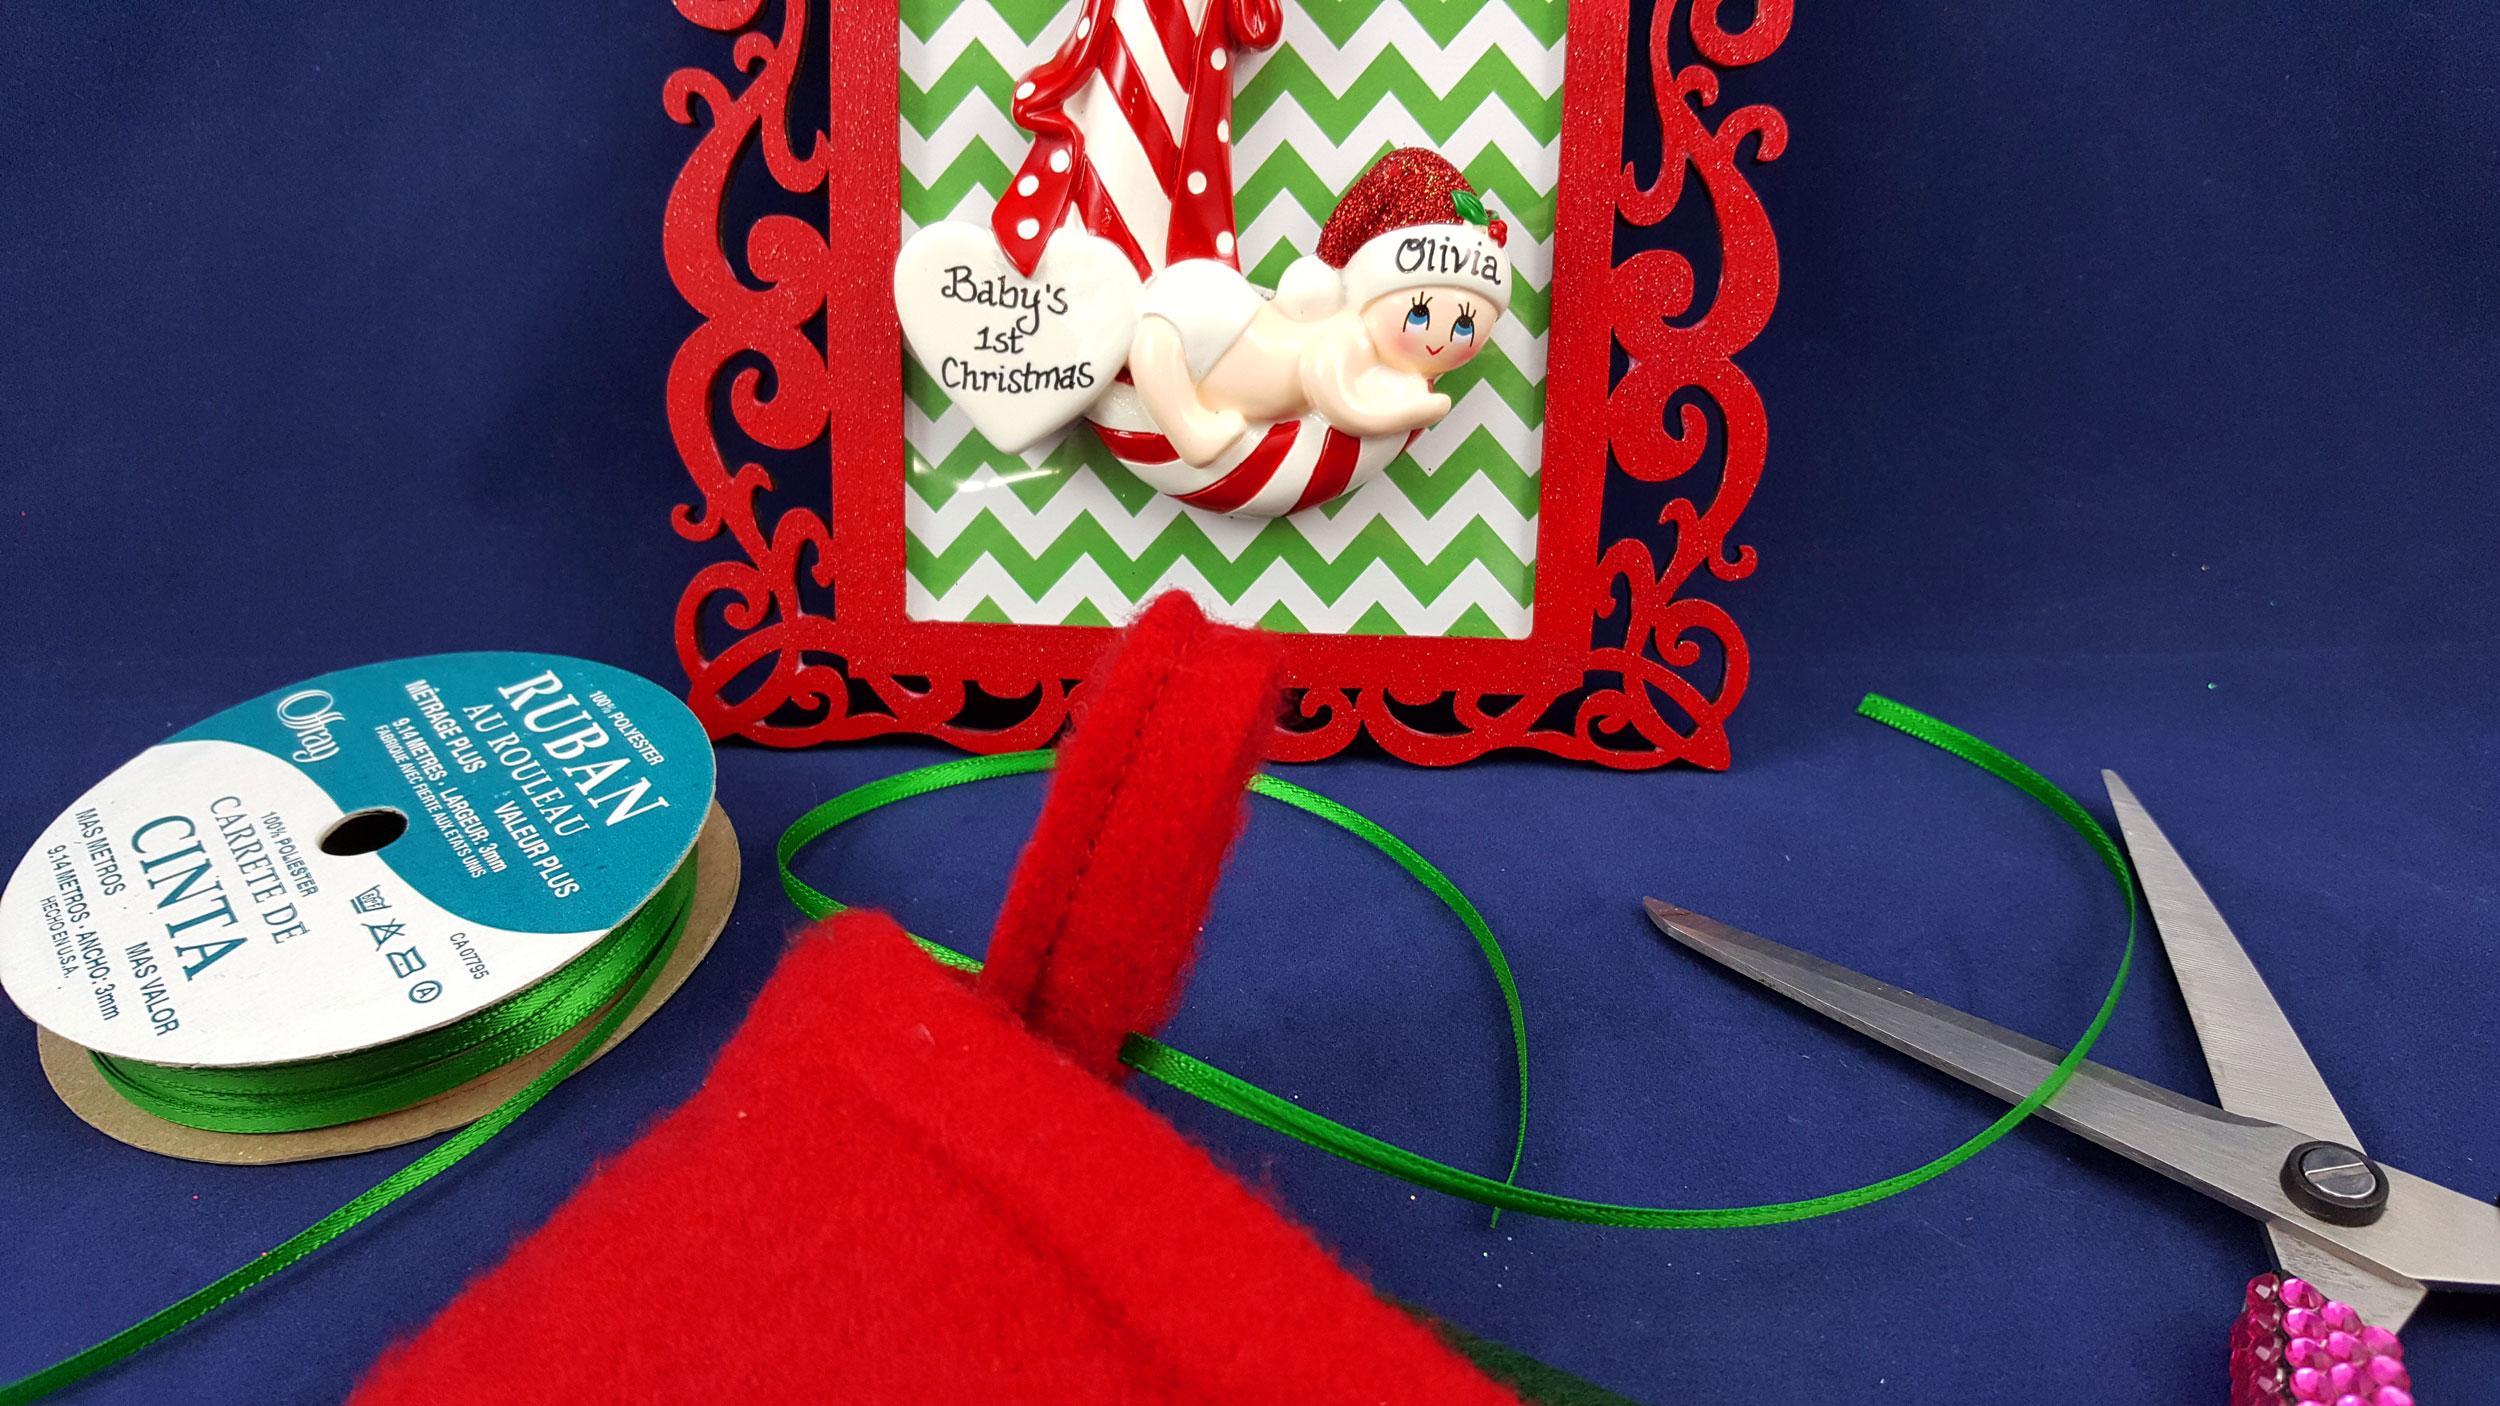 The final step is to add ribbon to the bottom to hang your stocking for a personalized Christmas stocking hanger in place of a fire place. | OrnamentShop.com